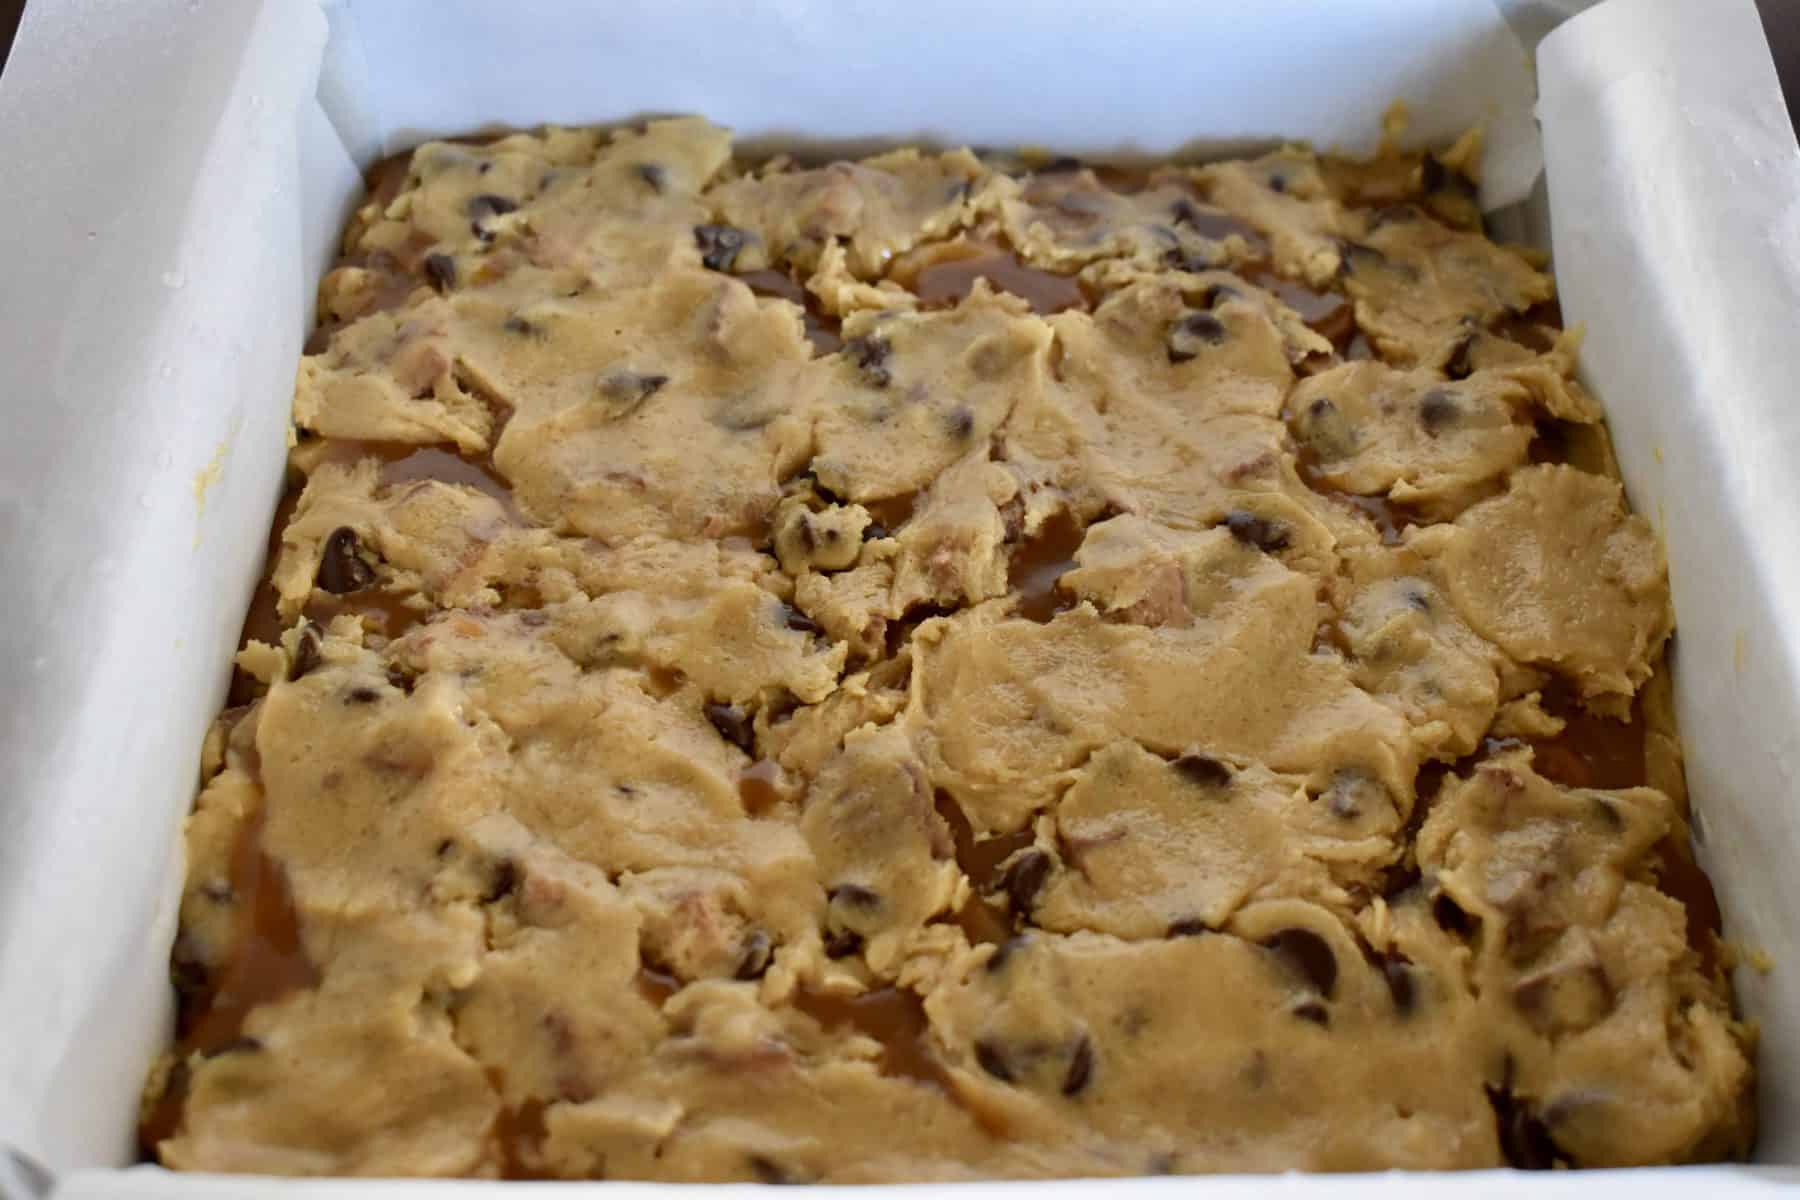 batter pressed over the caramel layer of the bars. 